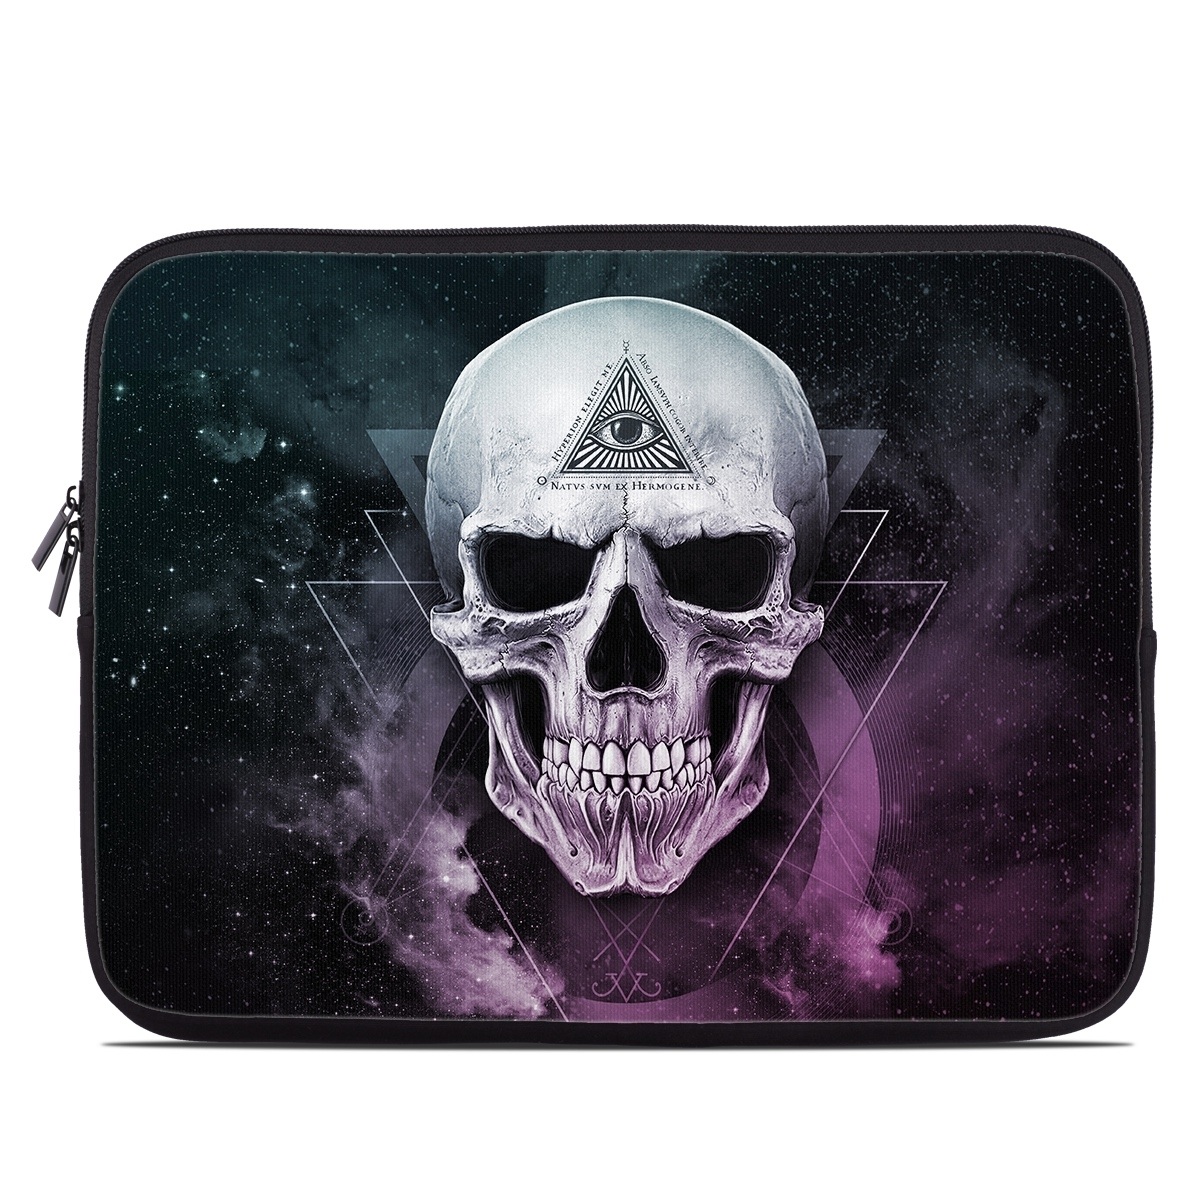 Laptop Sleeve - The Void (Image 1)